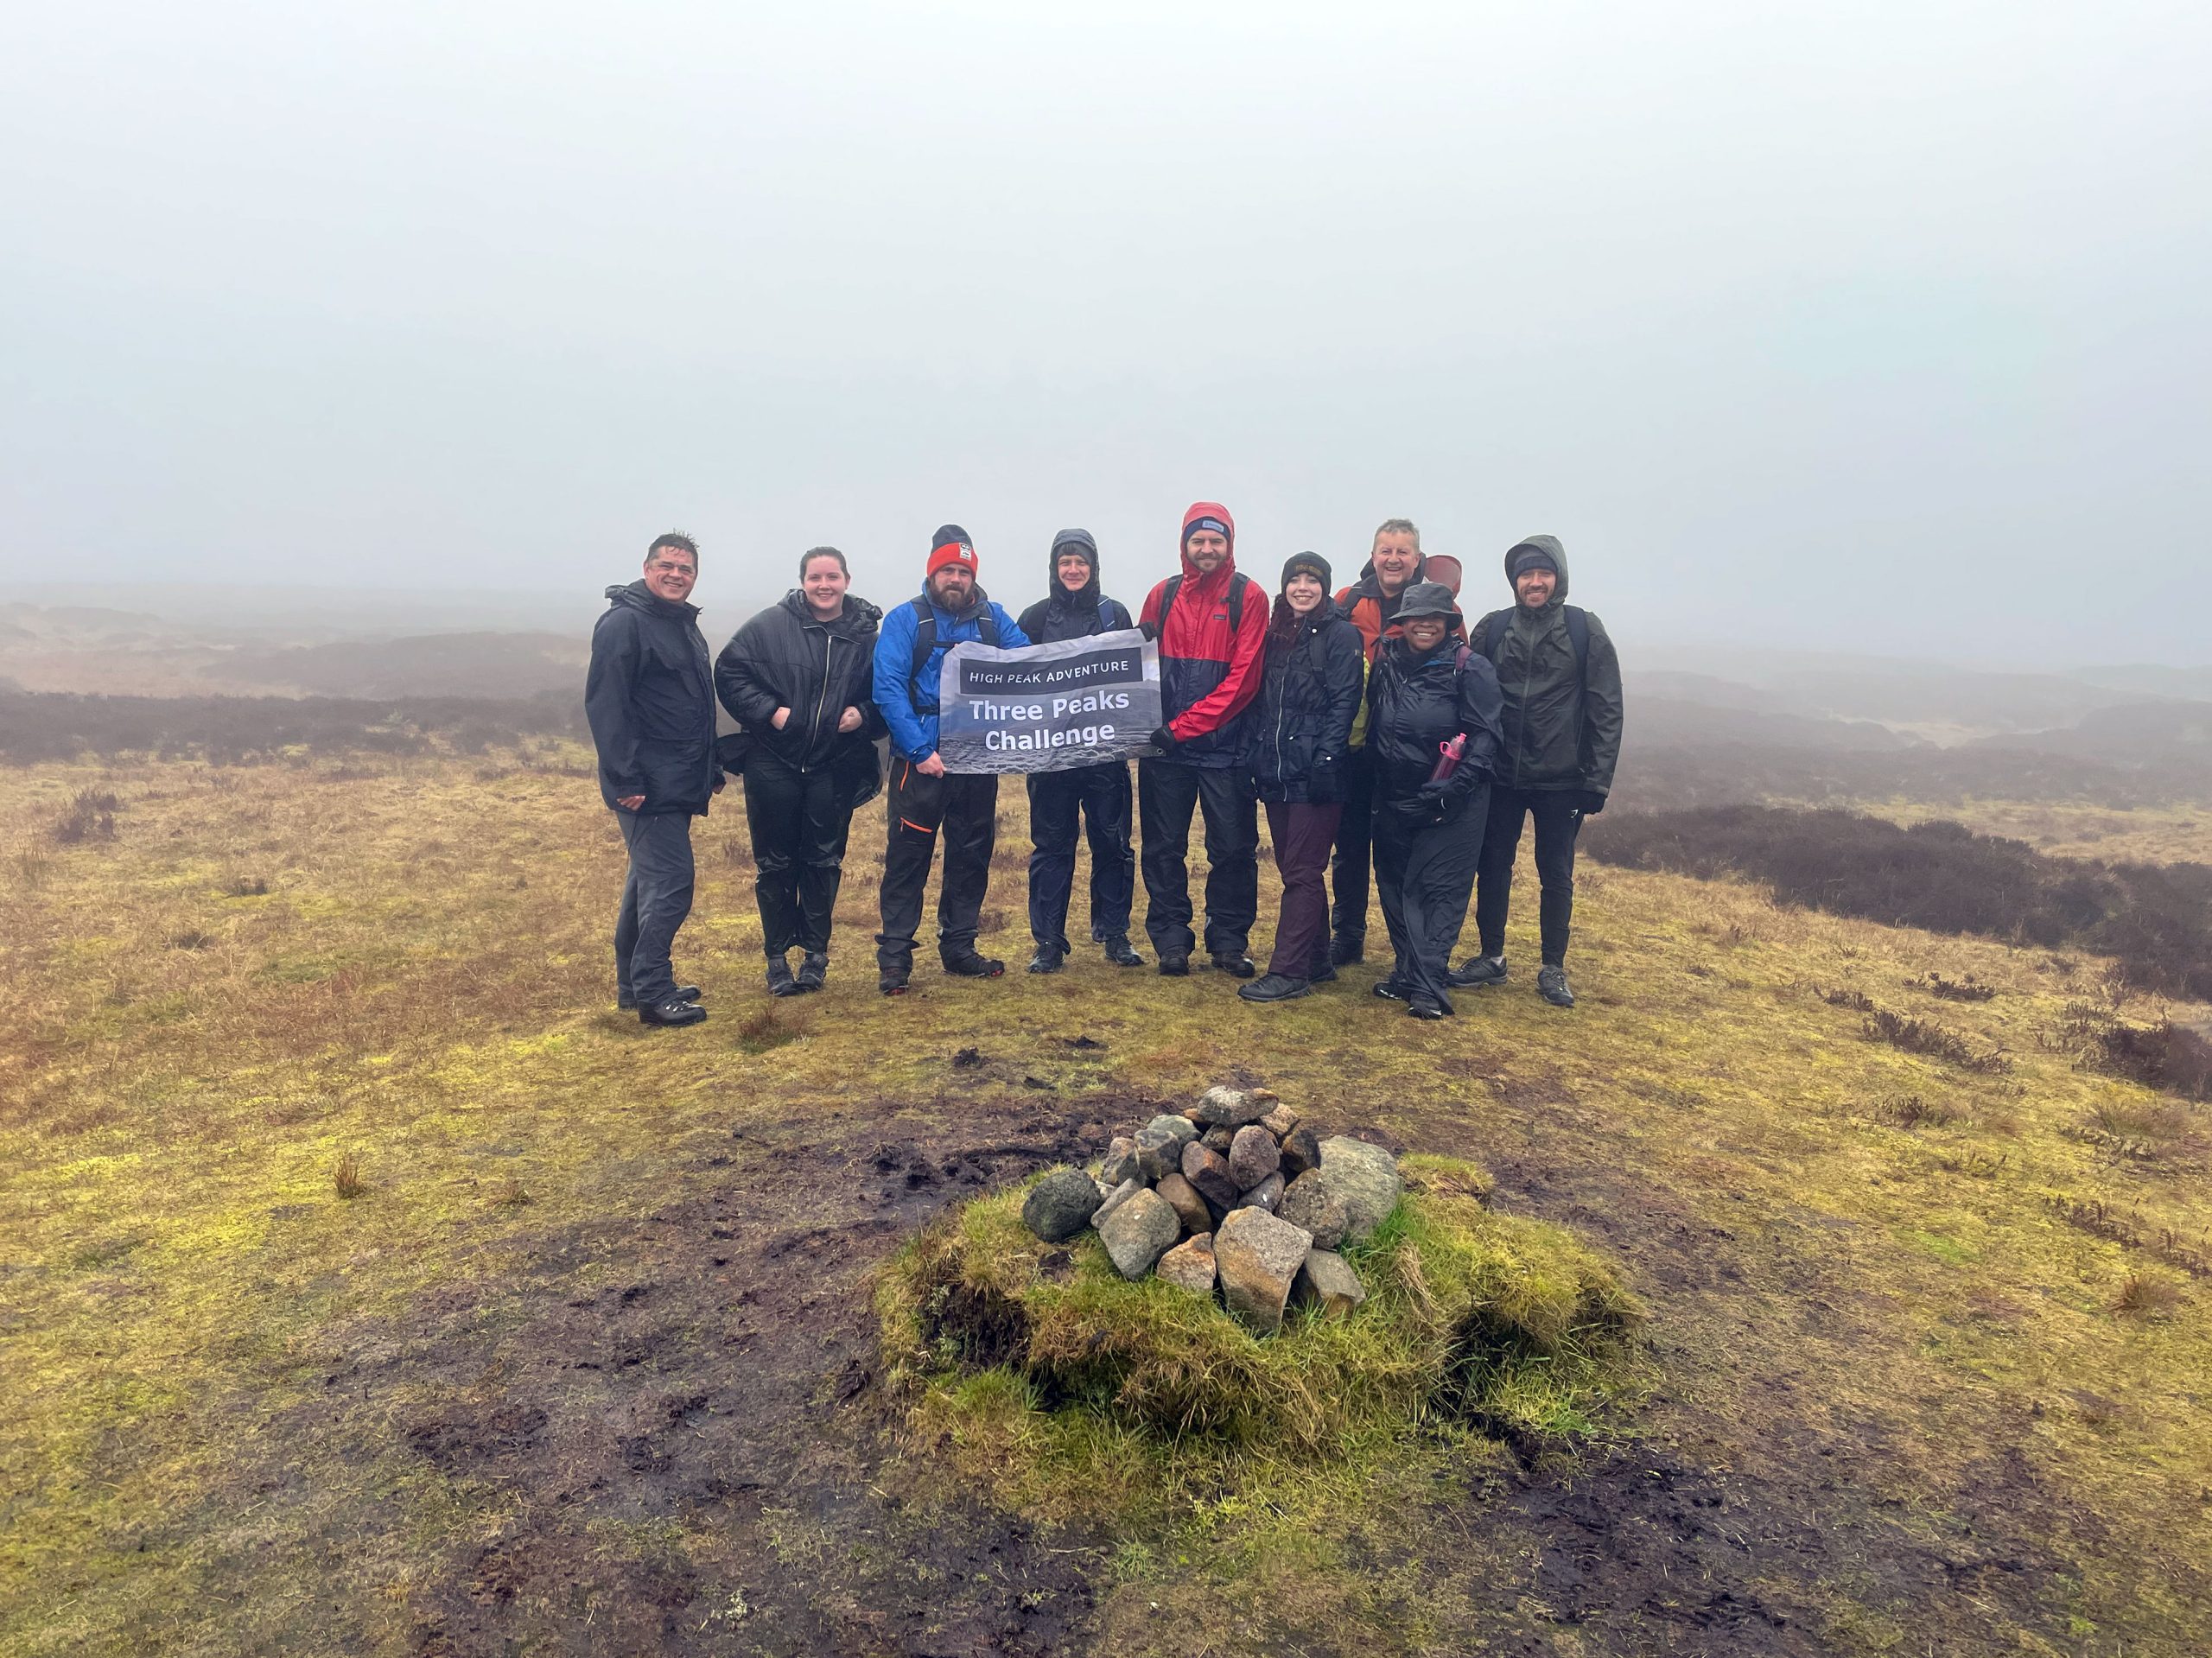 A1 Comms staff took on the Three Peaks Challenge to raise money for Alfreton Park School